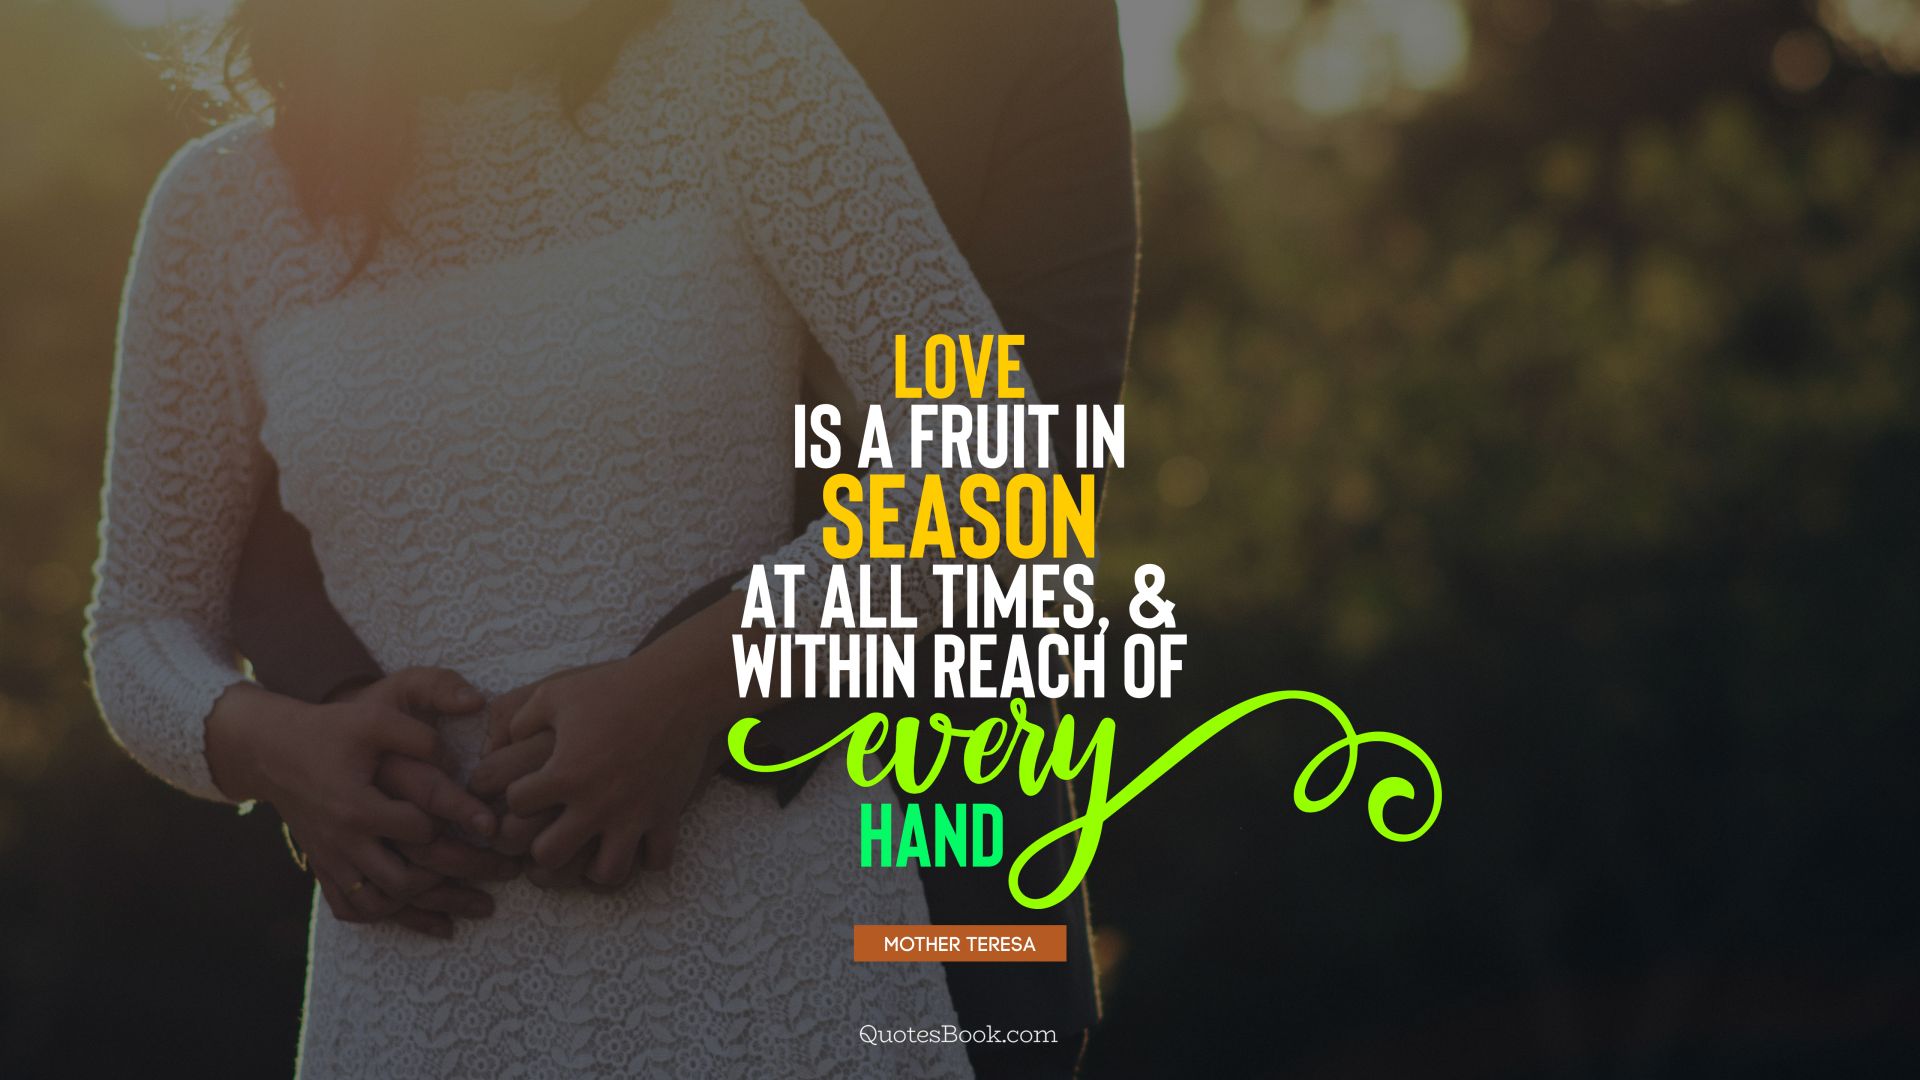 Love is a fruit in season at all times, and within reach of every hand. - Quote by Mother Teresa